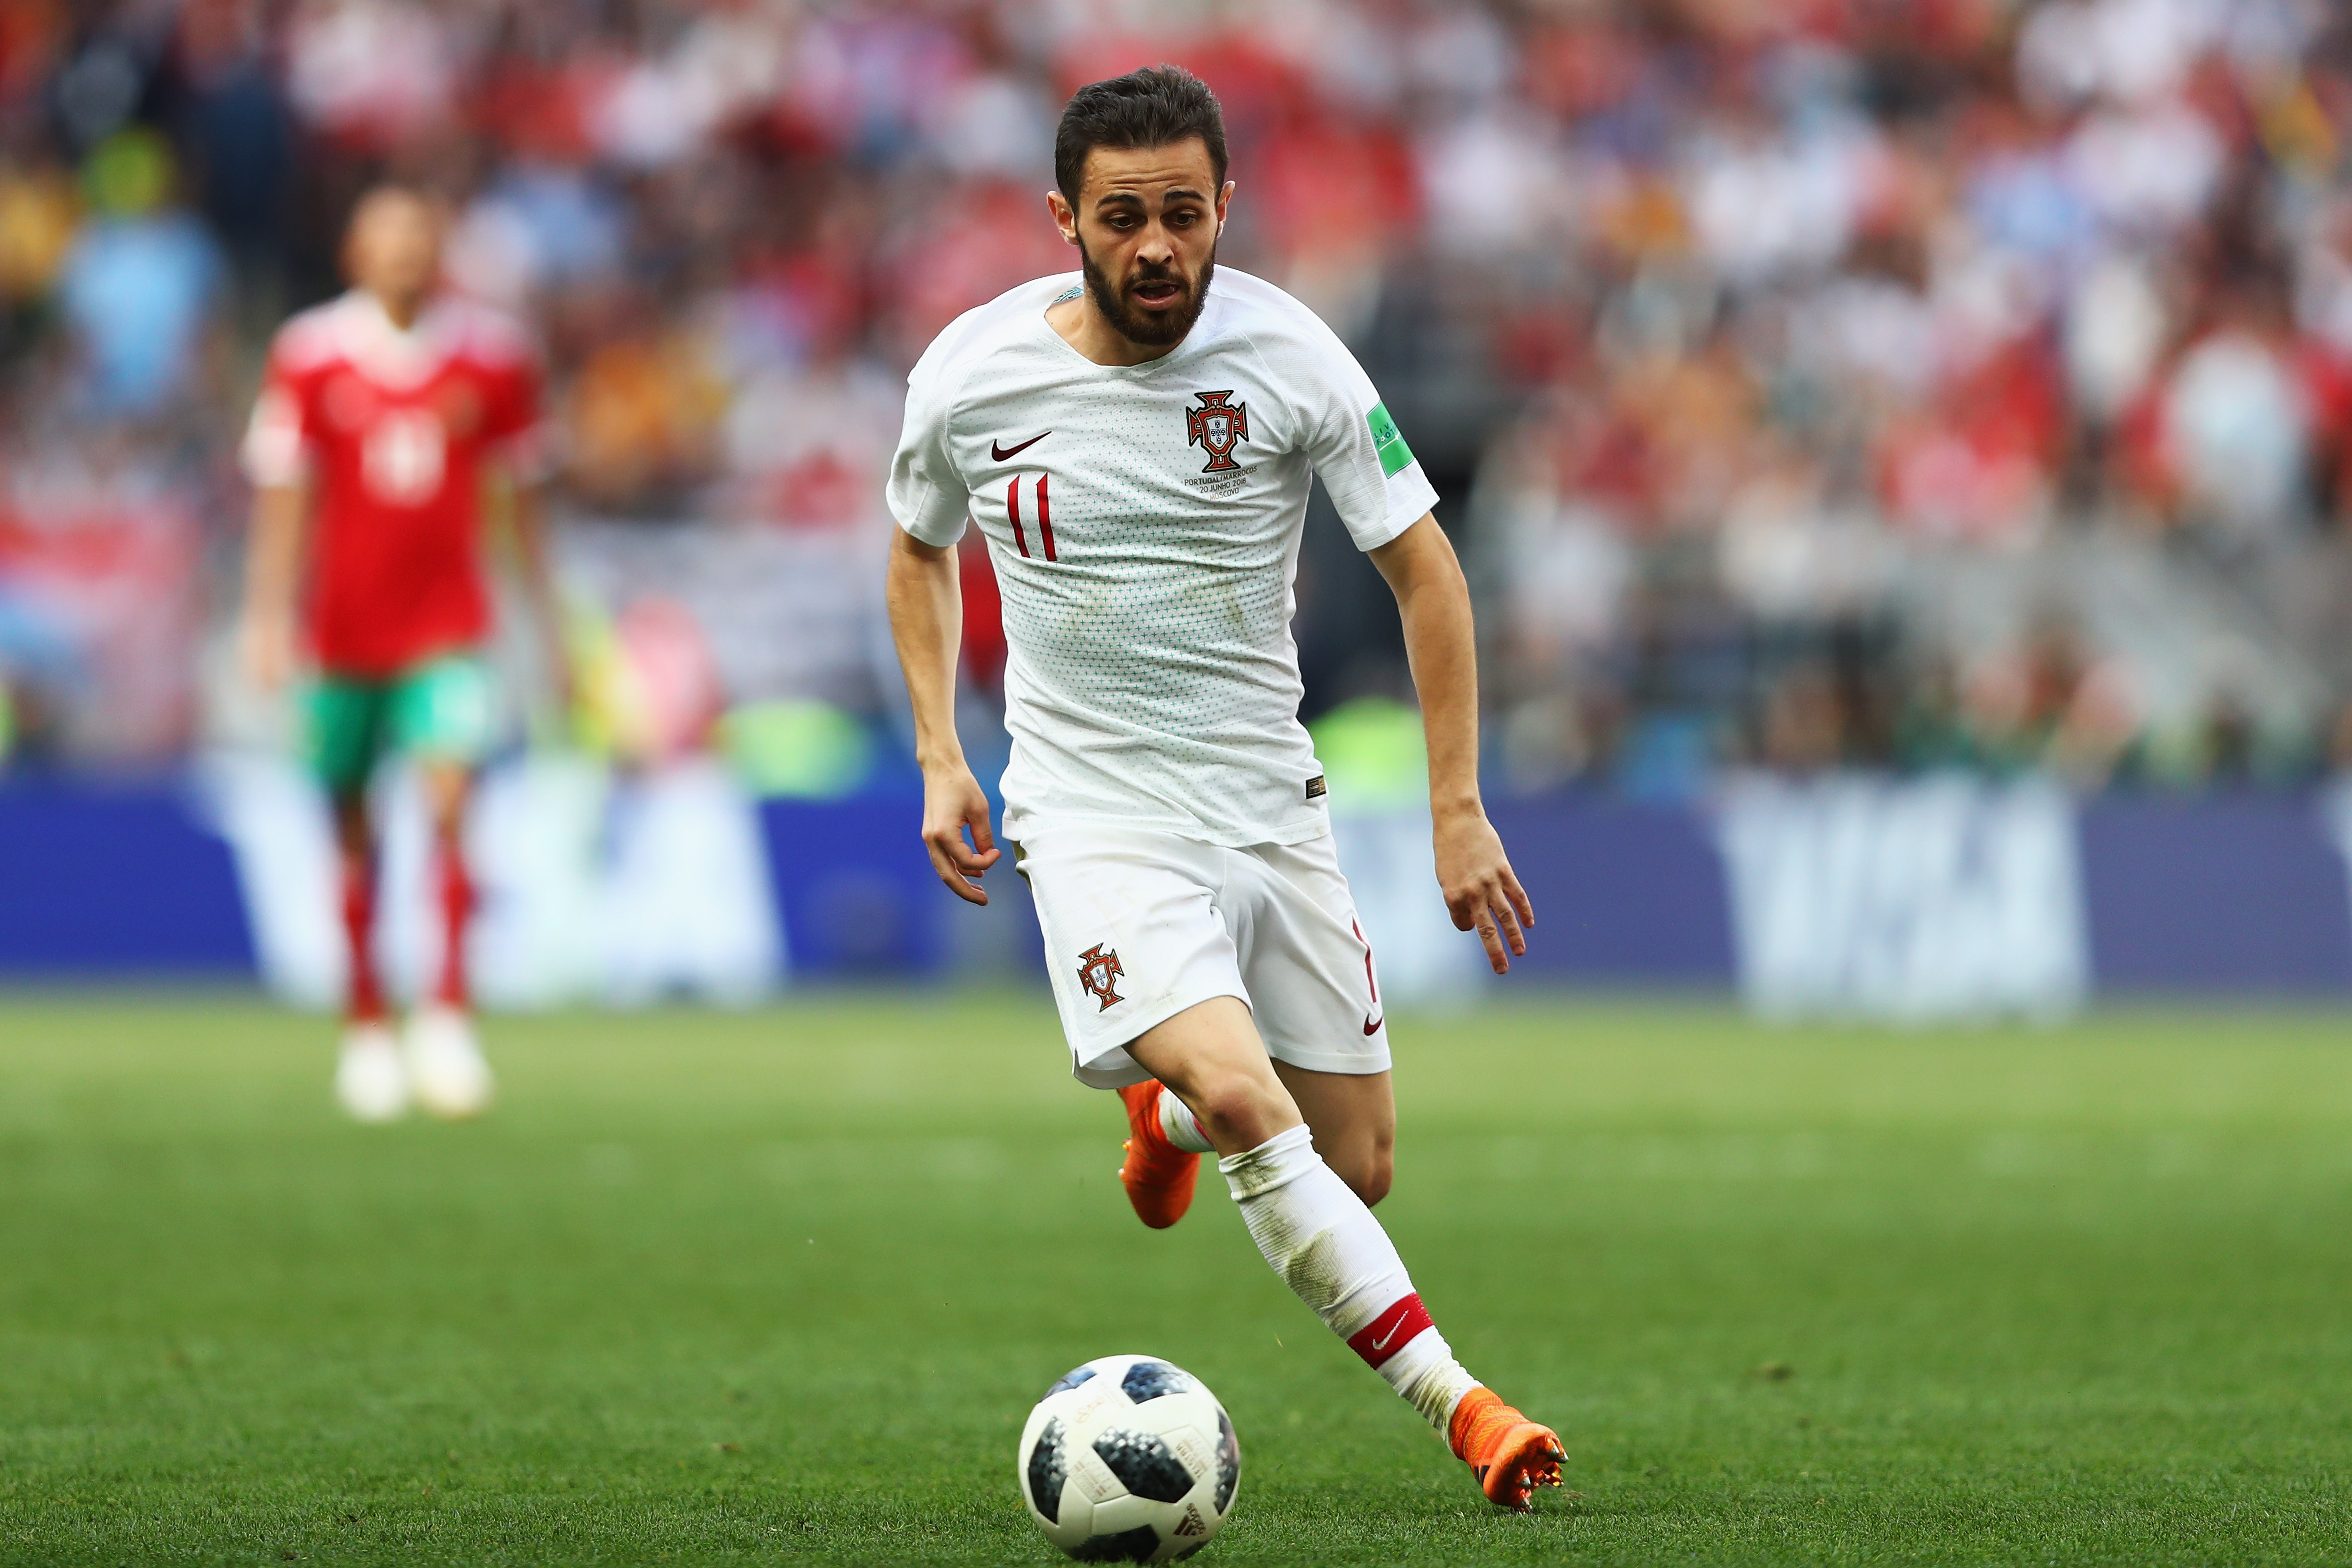 Could Bernardo Silva be on his way to Barcelona soon? (Photo by Dean Mouhtaropoulos/Getty Images)